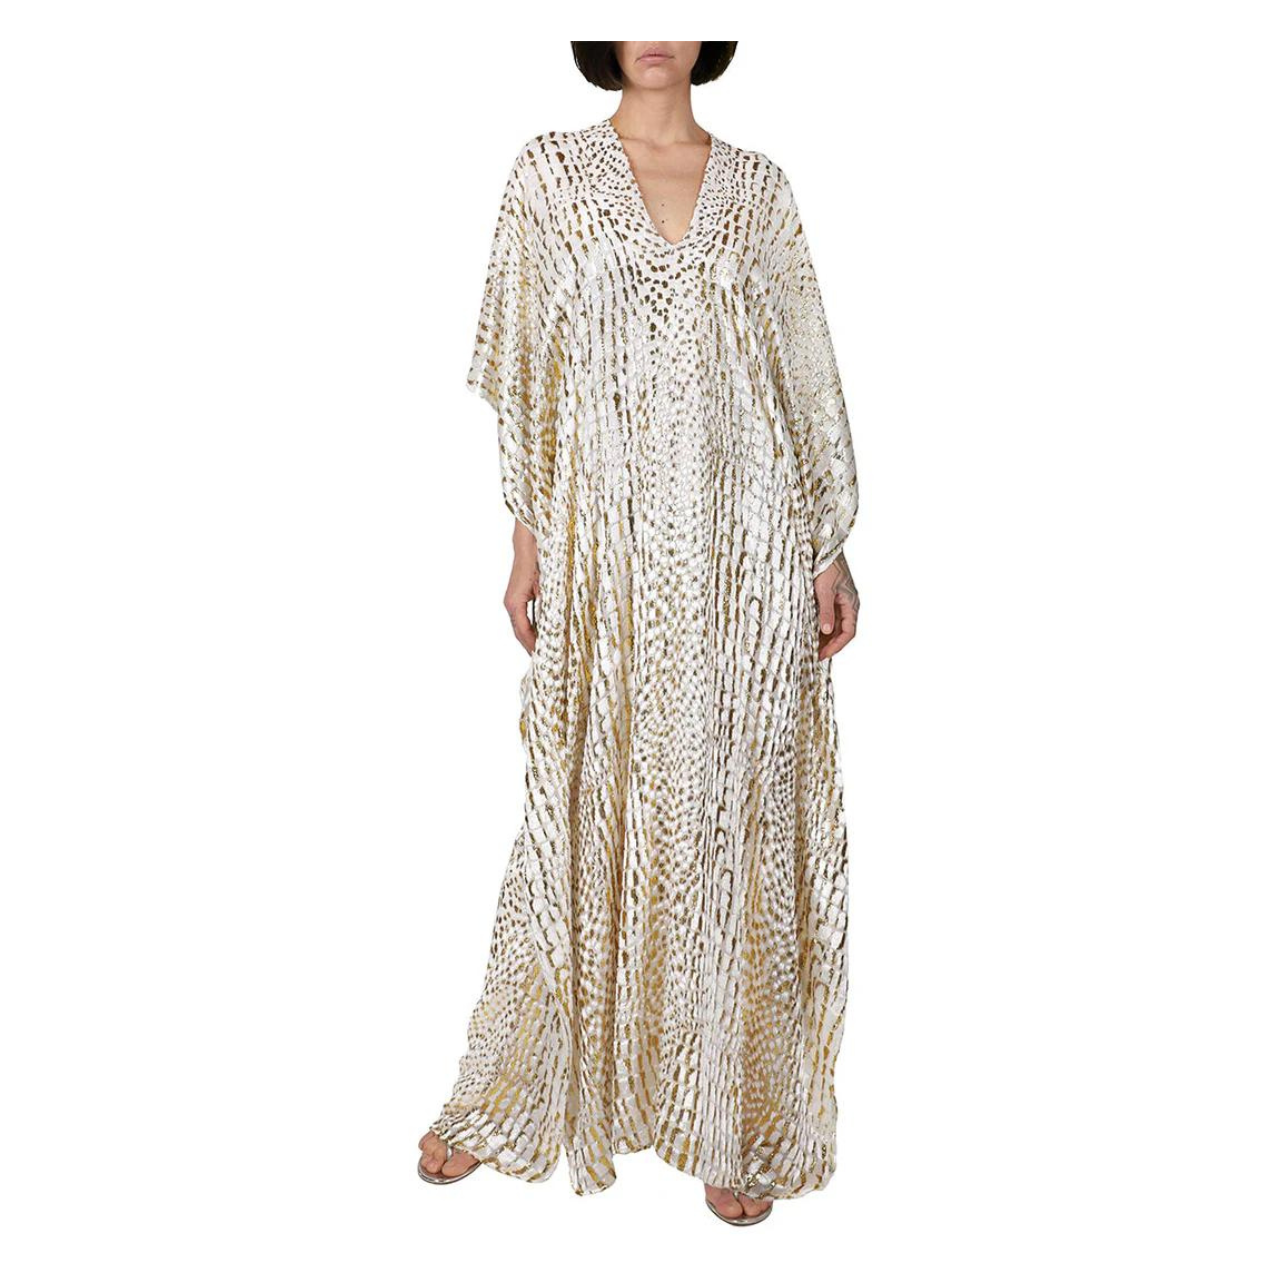 Marie France Van Damme printed caftan on model in white and gold croco pattern